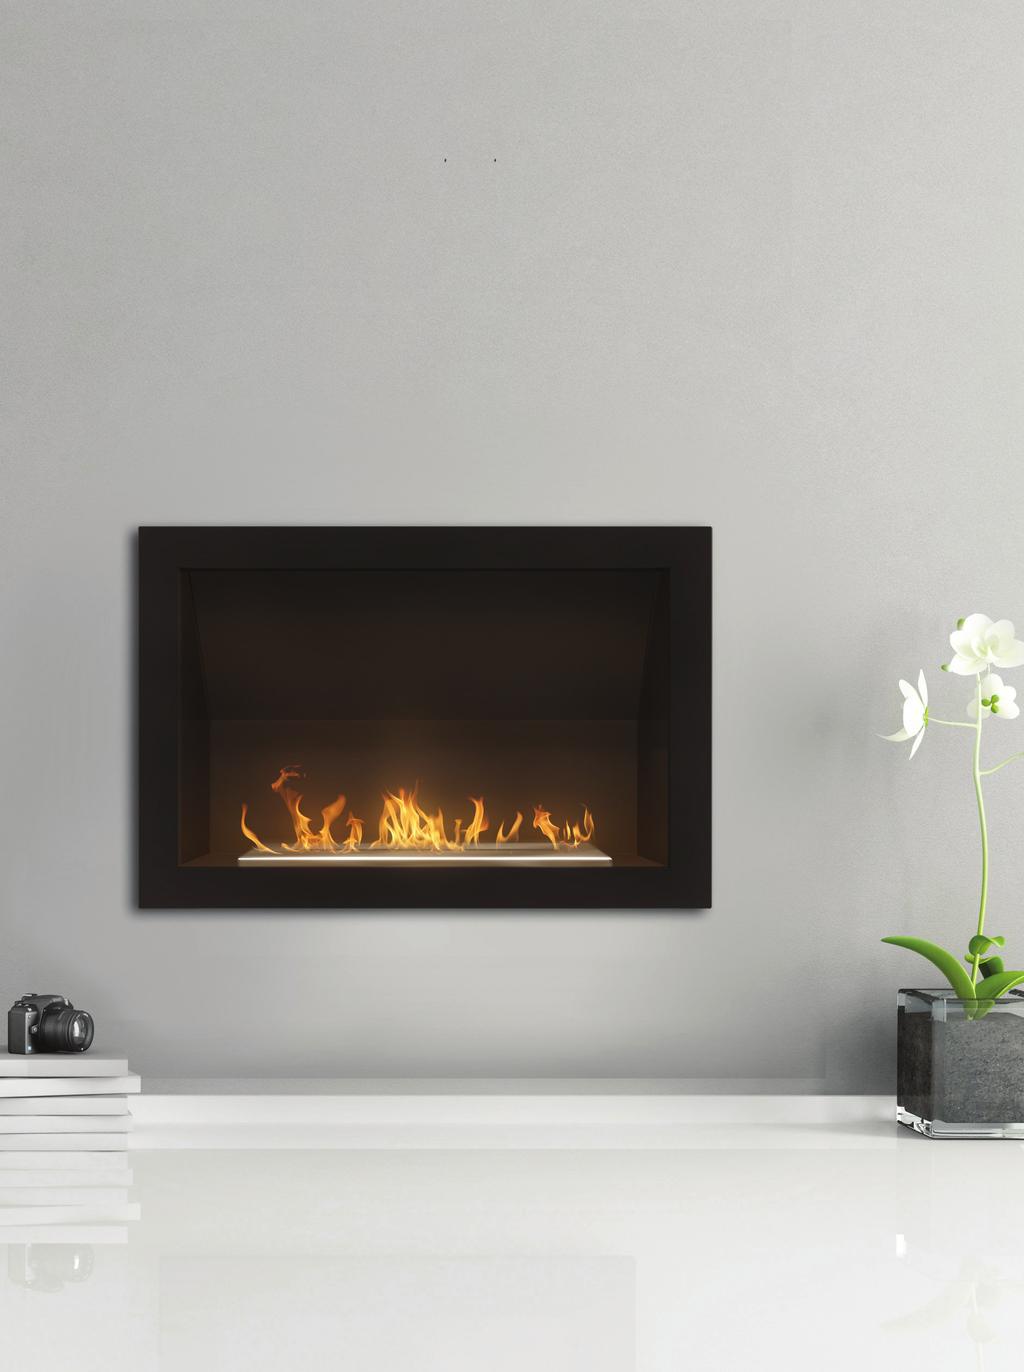 9lt/hr Burning Time: Up to 12 hours Performance: 10 kw/hr rating CMFBCLASSIC Commercial Classic Firebox Complete with IFMB614 Burner H600mm x L900mm x D375mm Capacity: 7.7 litres Consumption: avg 0.